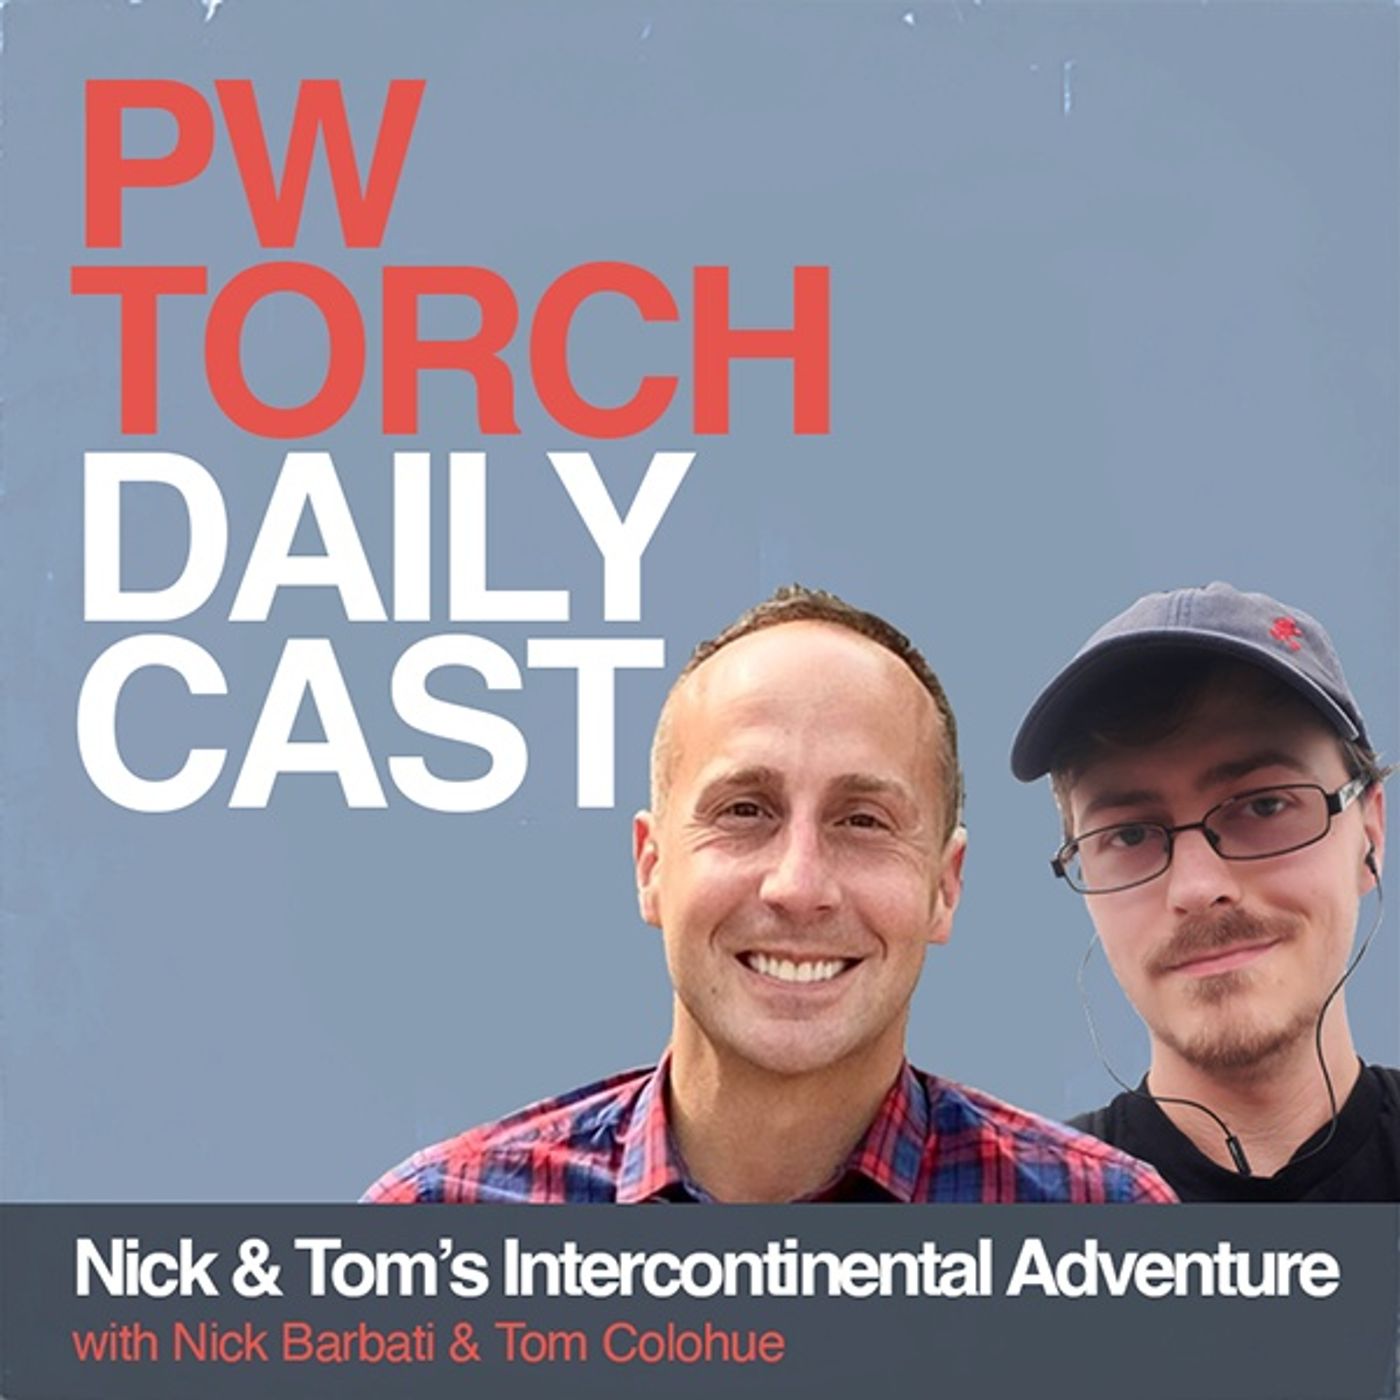 Nick & Tom’s Intercontinental Adventure - Rock taking Cody's place against Reigns + 10 Yrs Ago Mitchell & Bryant talk 2014 Rumble, more